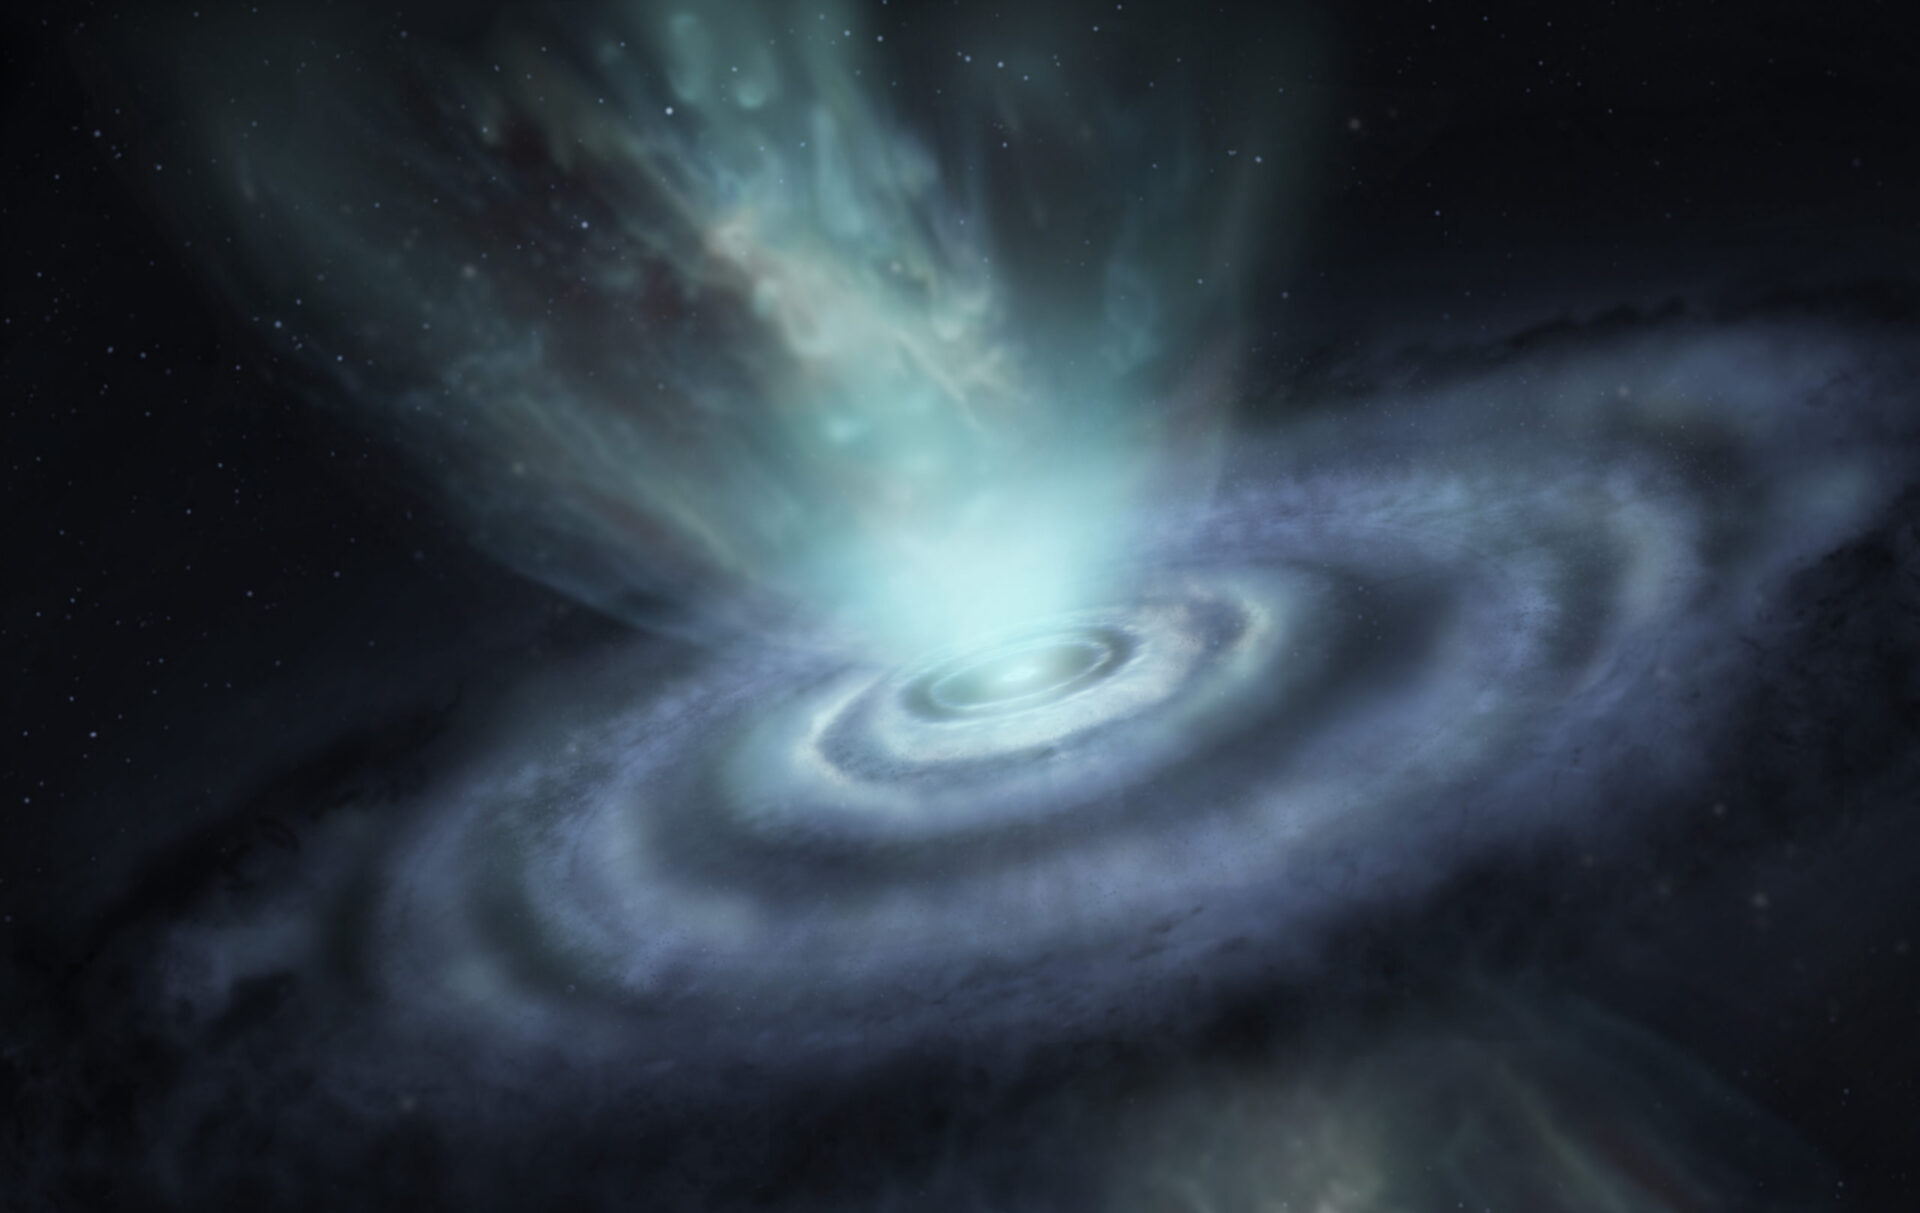 <p>Scientists have observed, for the first time, the mysterious death throes of a carbon-rich asymptotic branch star (AGB). V Hydrae’s final act is characterized by the mass ejection of matter into space, resulting in the slow expansion of six rings and the formation of two hourglass-shaped structures shown here in this artist’s conception. Credit: ALMA (ESO/NAOJ/NRAO)/S. Dagnello (NRAO/AUI/NSF)</p>
